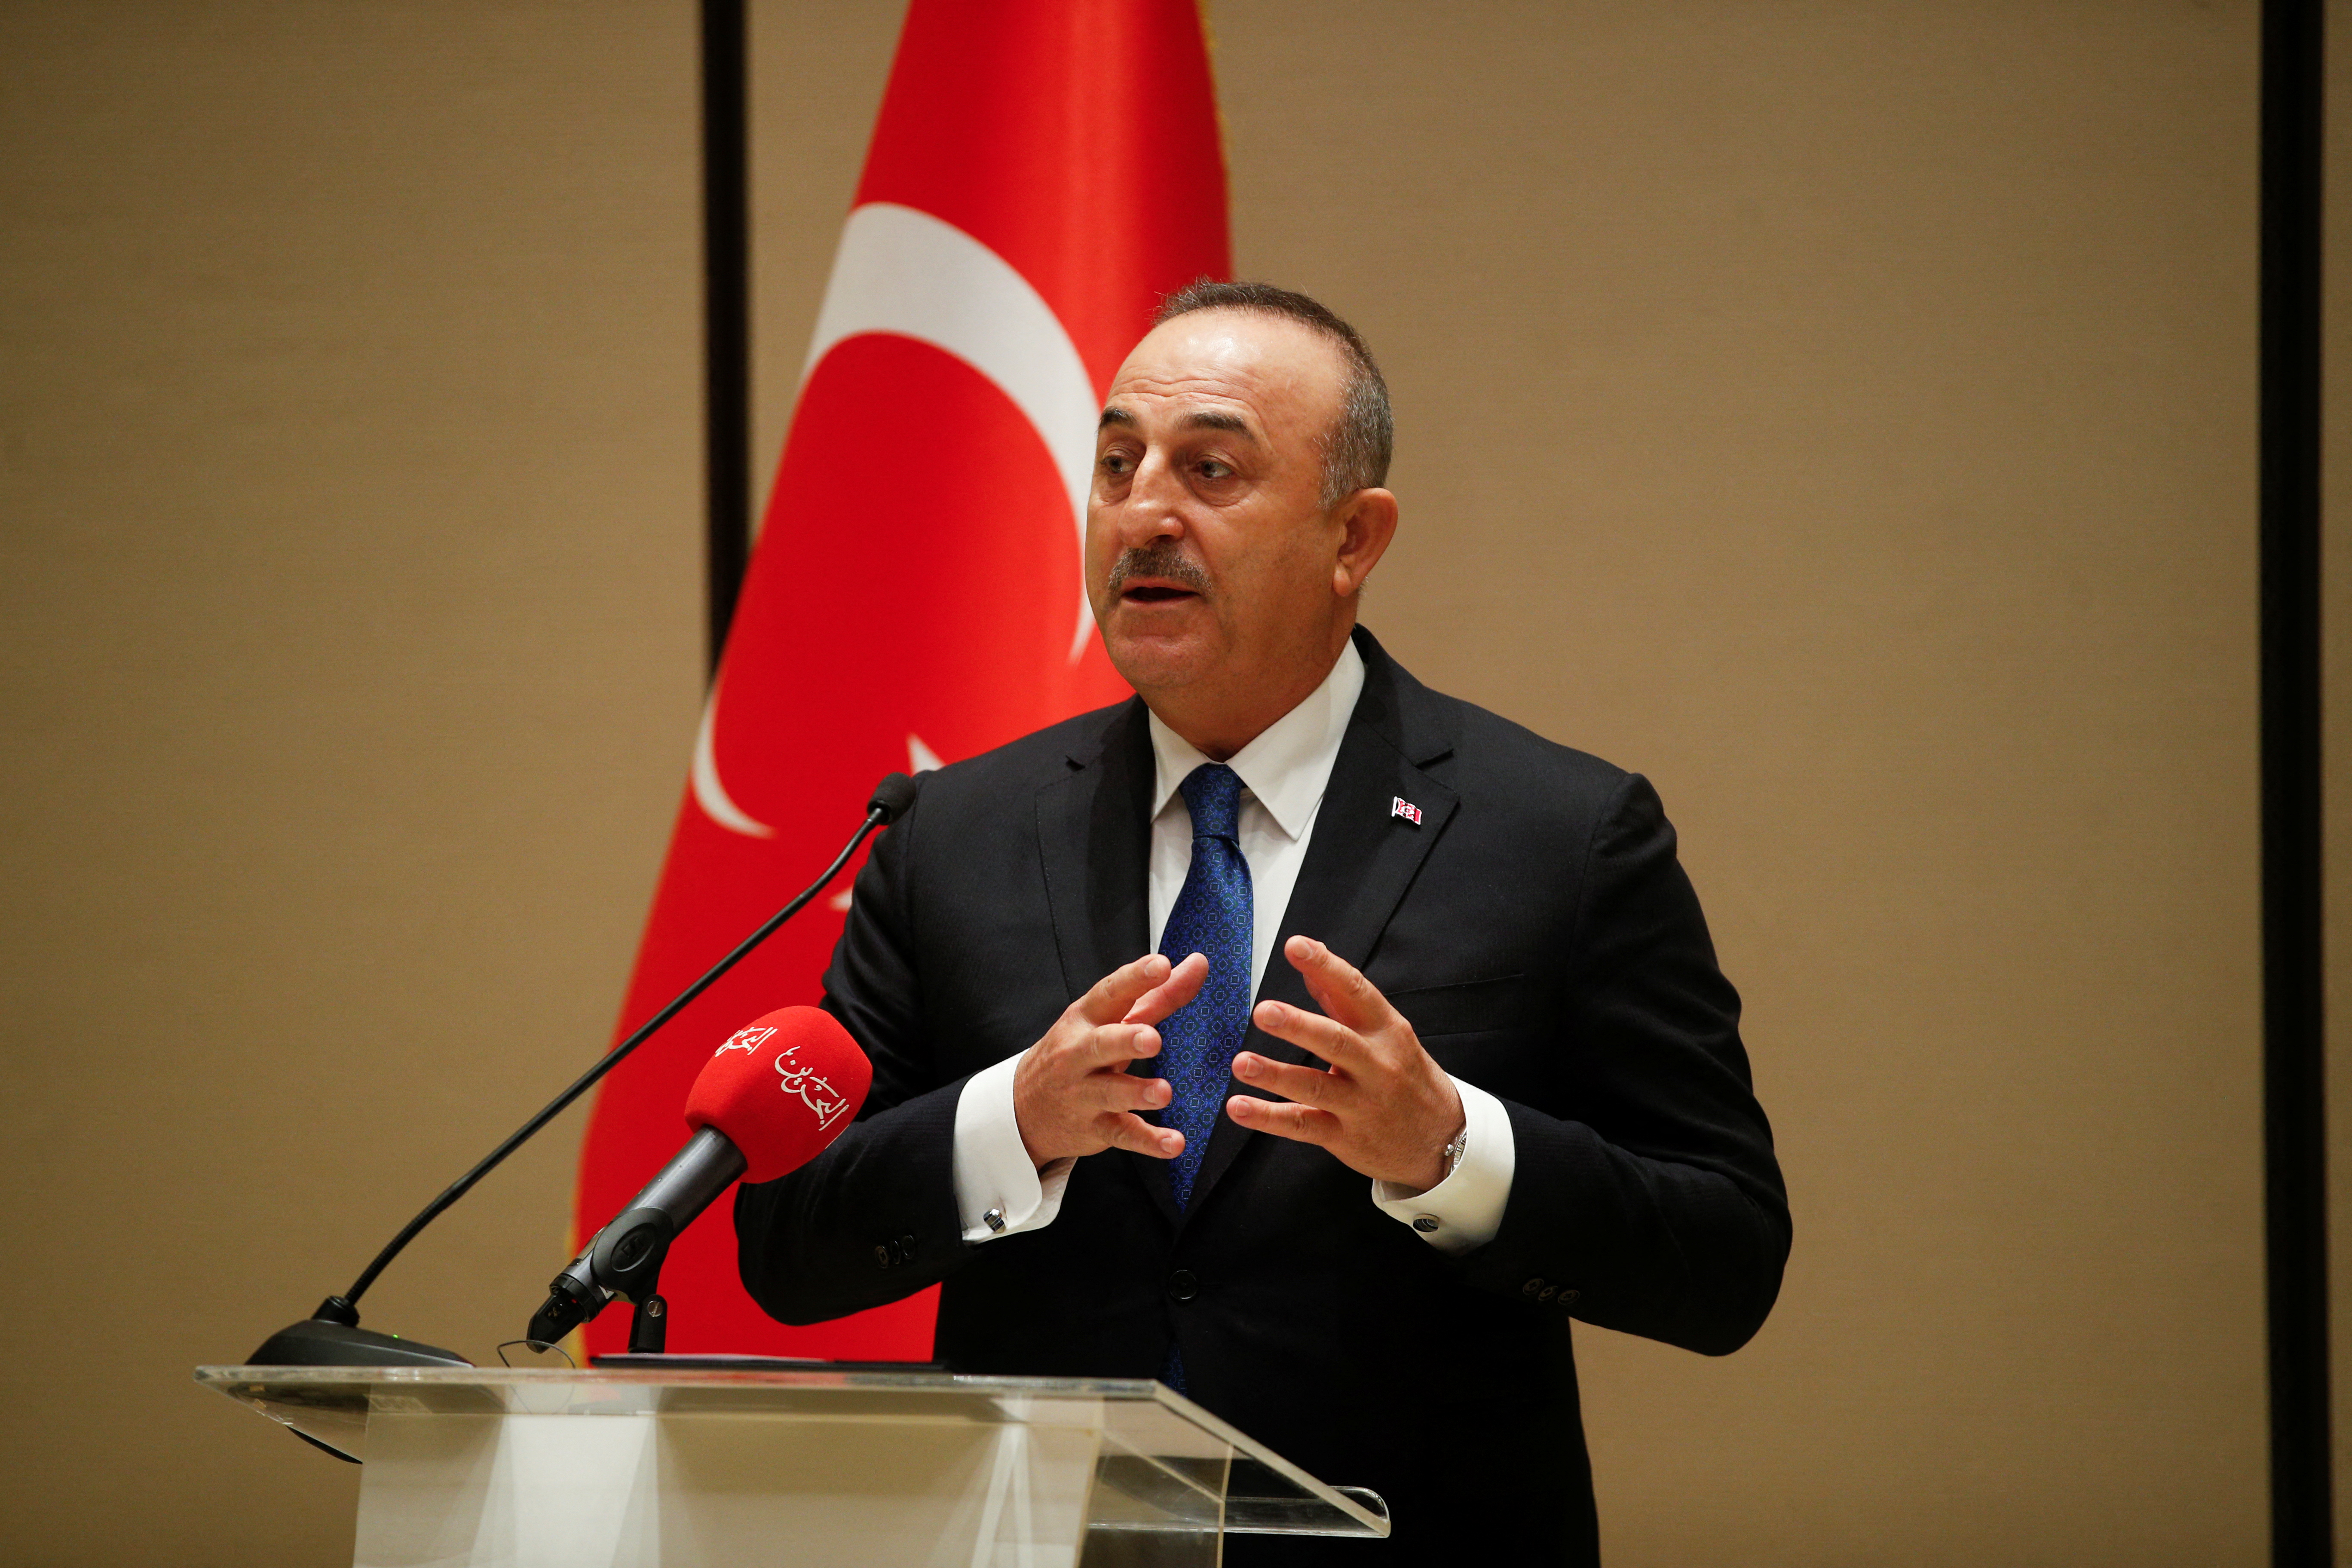 Turkish Foreign Minister Mevlut Cavusoglu speaks during a joint news conference with Bahrain's Foreign Minister Abdullatif Al-Zayani, in Manama